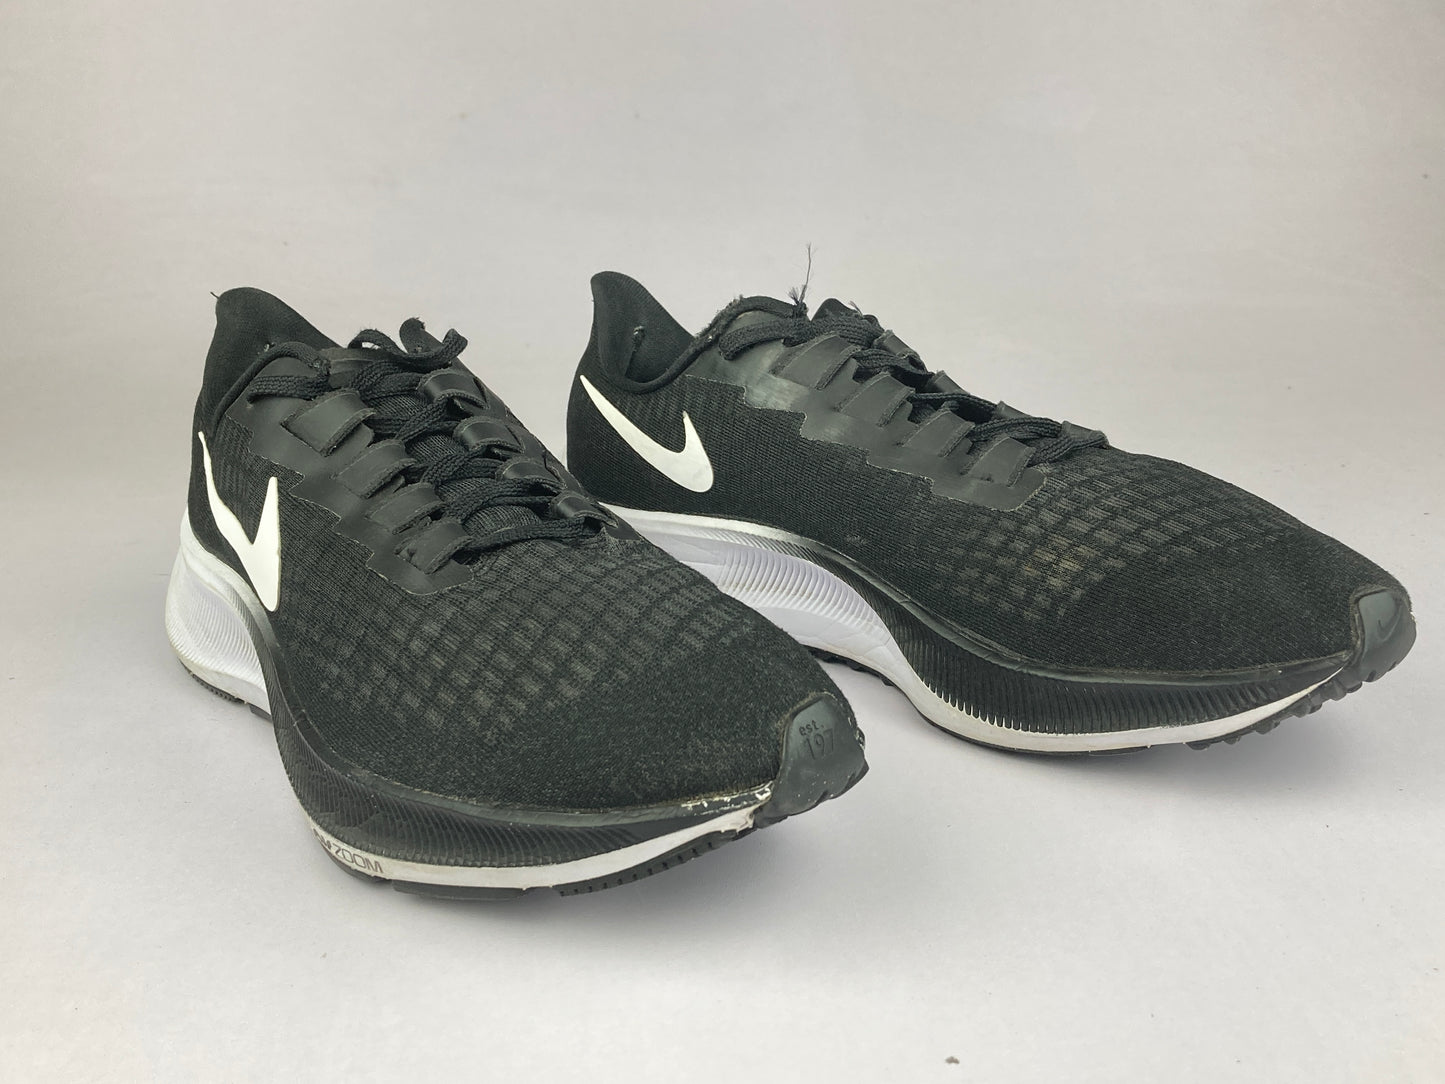 Shoes that are available online in Pakistan at athleticorner.com